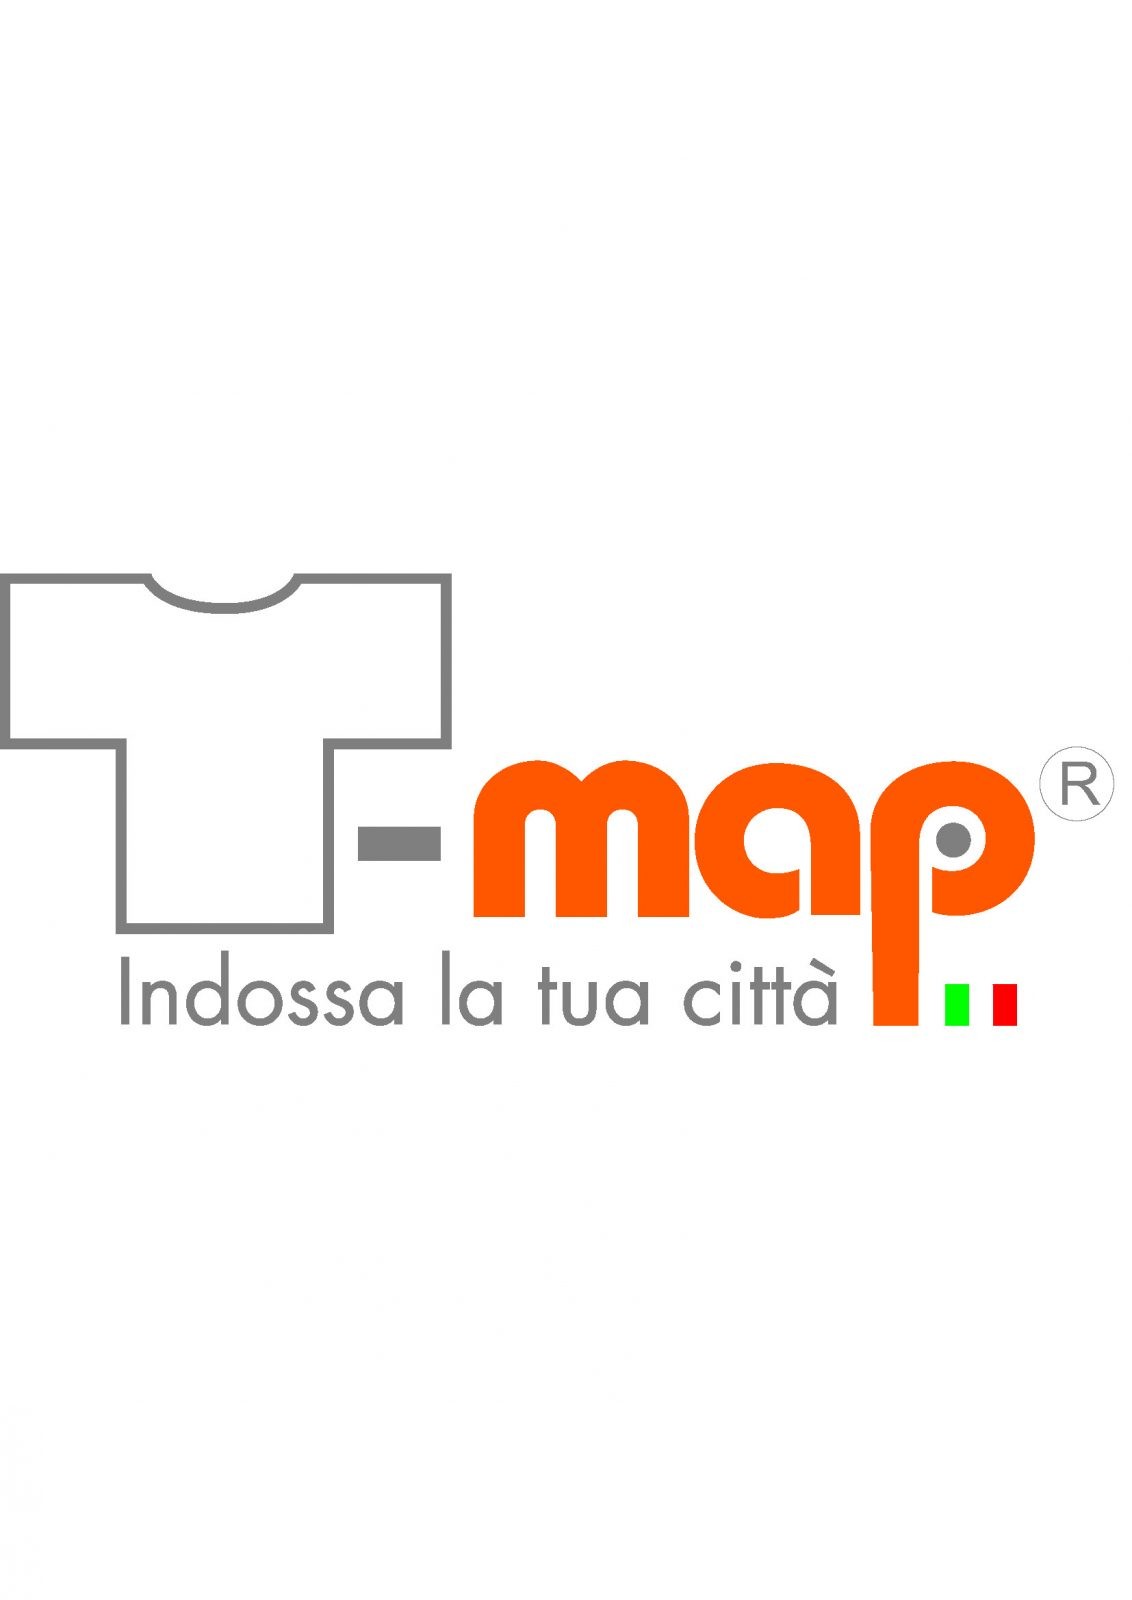 T-map